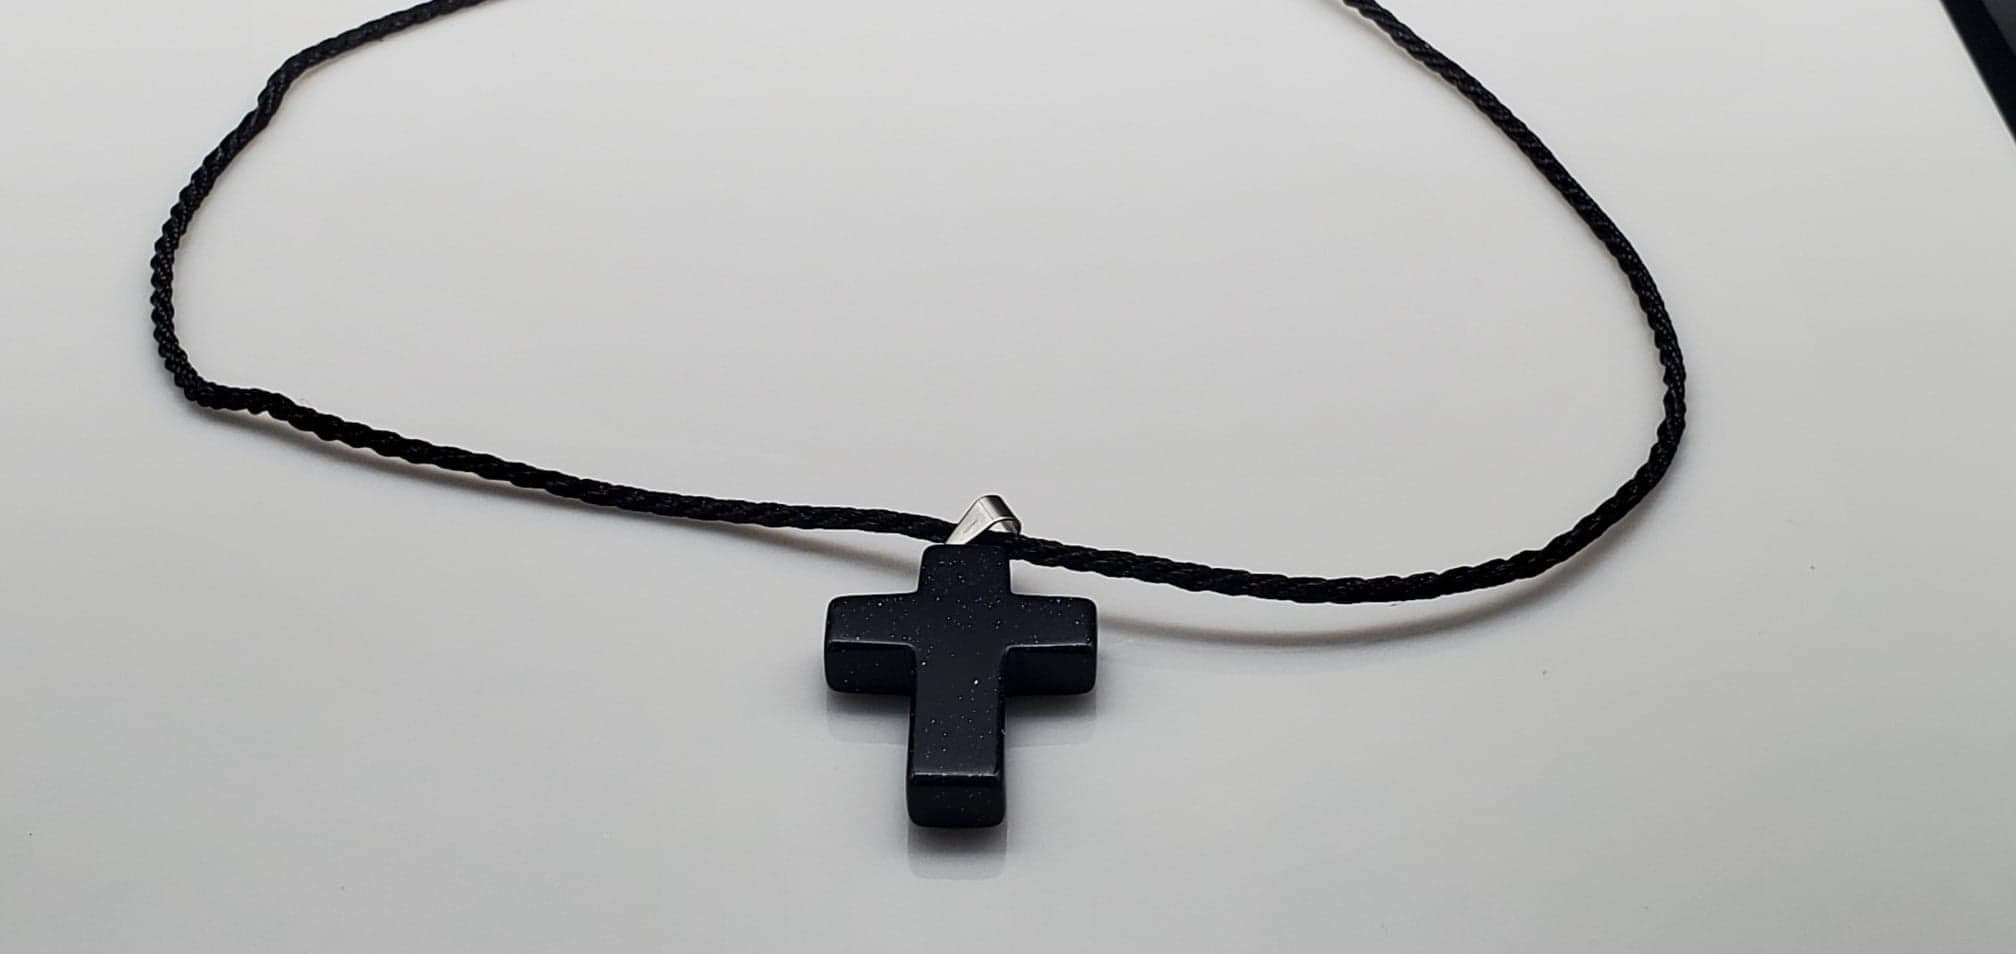 555Jewelry Stainless Steel Pendant Black Cross Necklace for Men, Mens Cross  Necklace, Cross Chain for Men, Black Rope Necklace, Boys Cross Necklace -  Adjustable Leather Cord Rope | Amazon.com